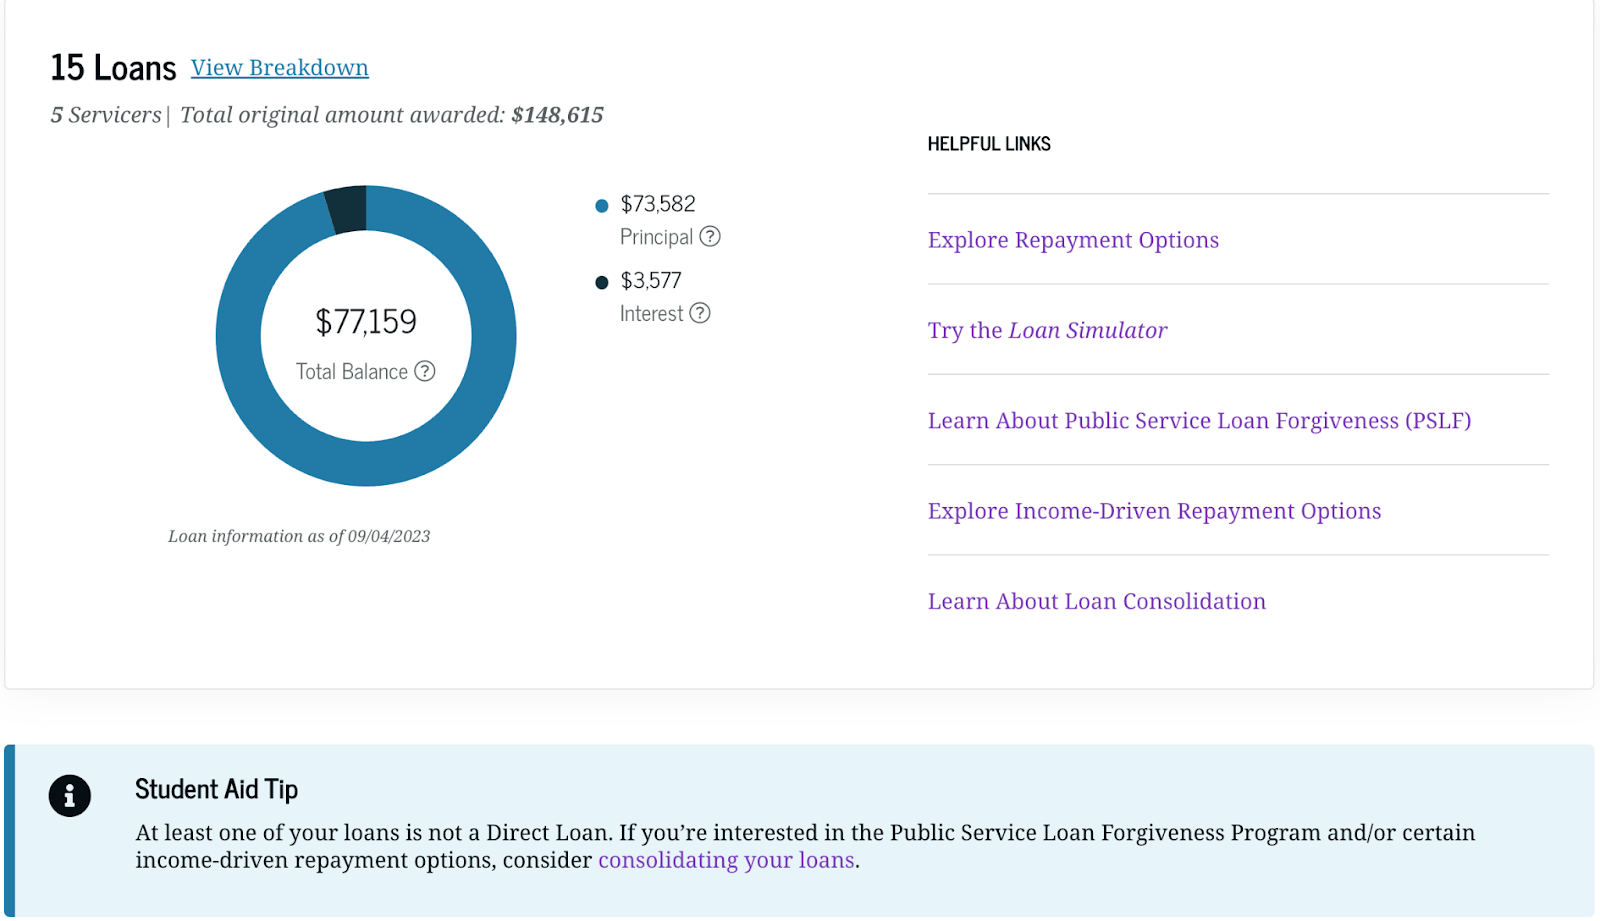 Image of loan breakdown from studentaid.gov